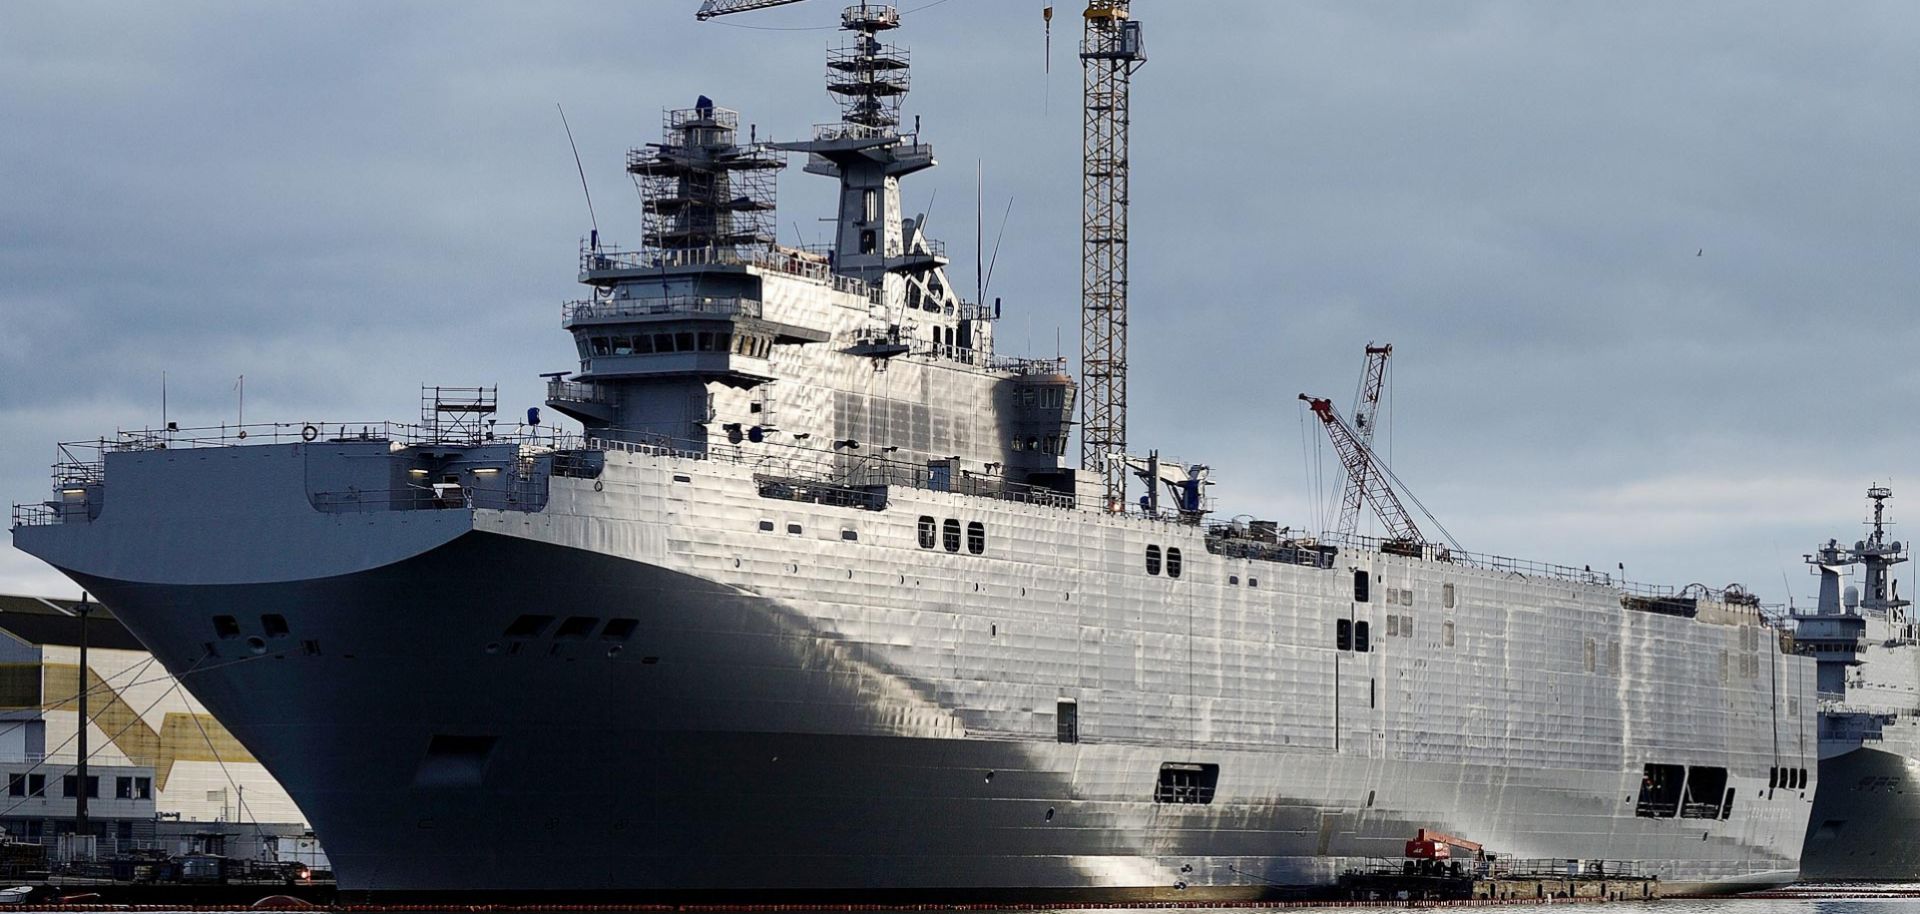 A Mistral-class warship under construction in Saint-Azaire, France, in December 2014.